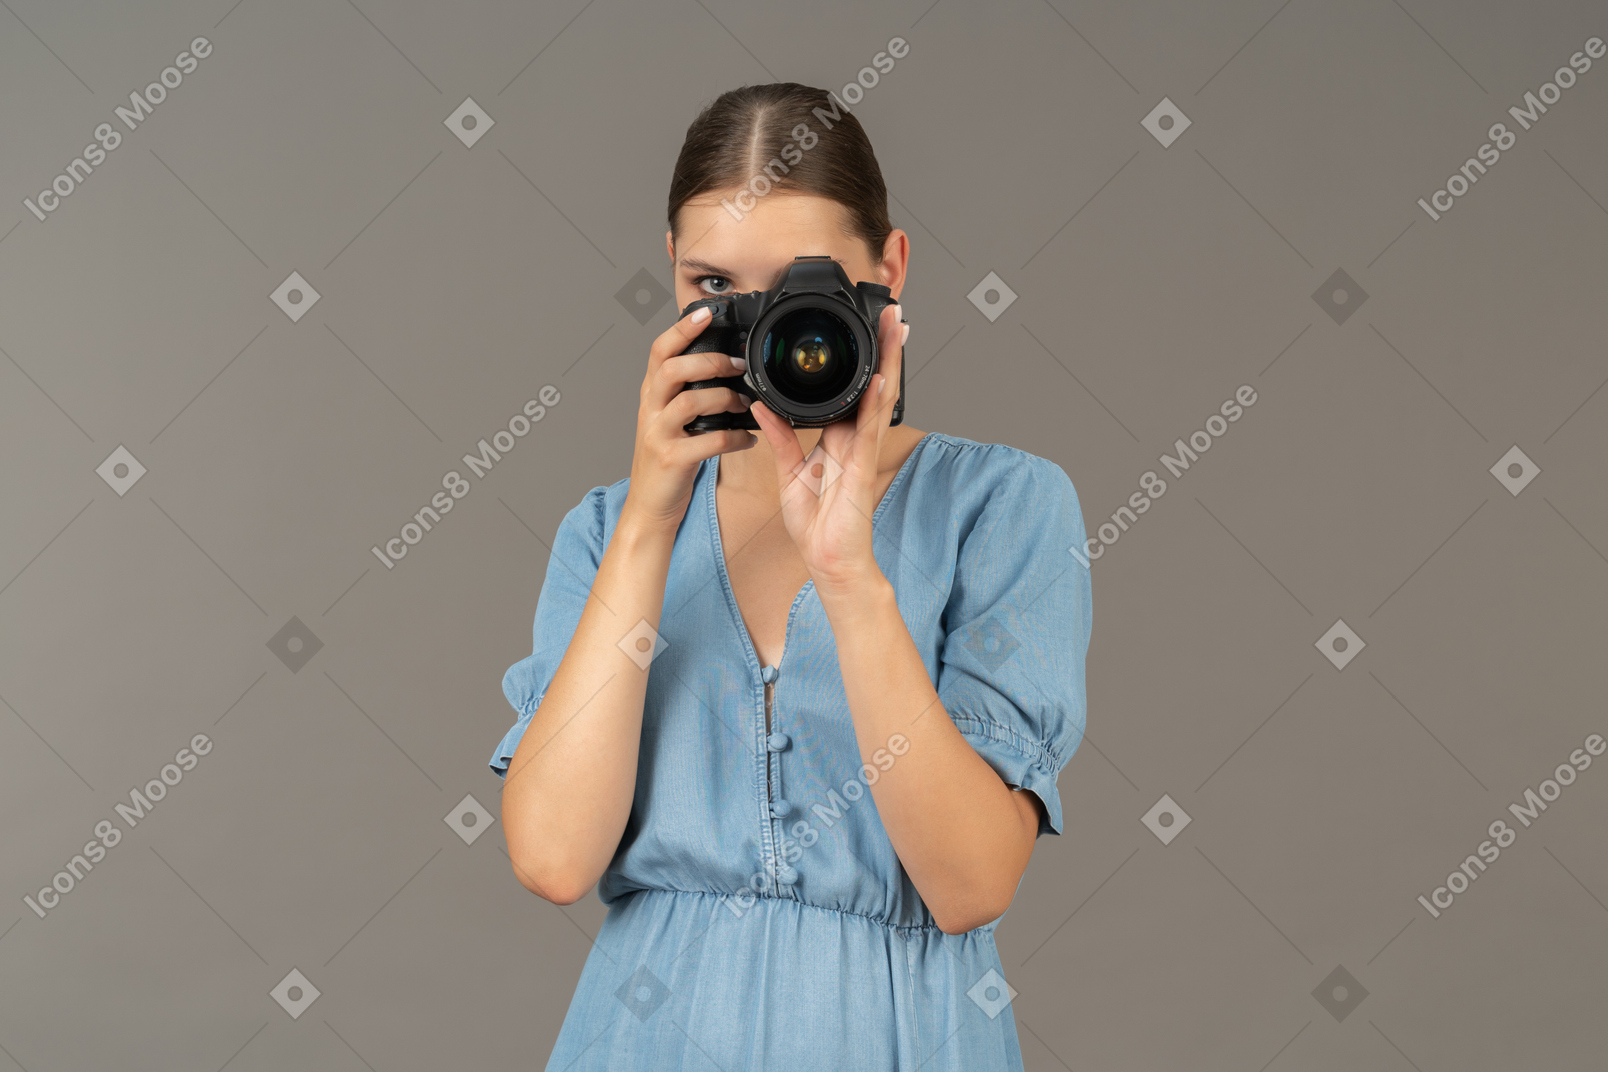 Front view of a young woman in blue dress taking shot